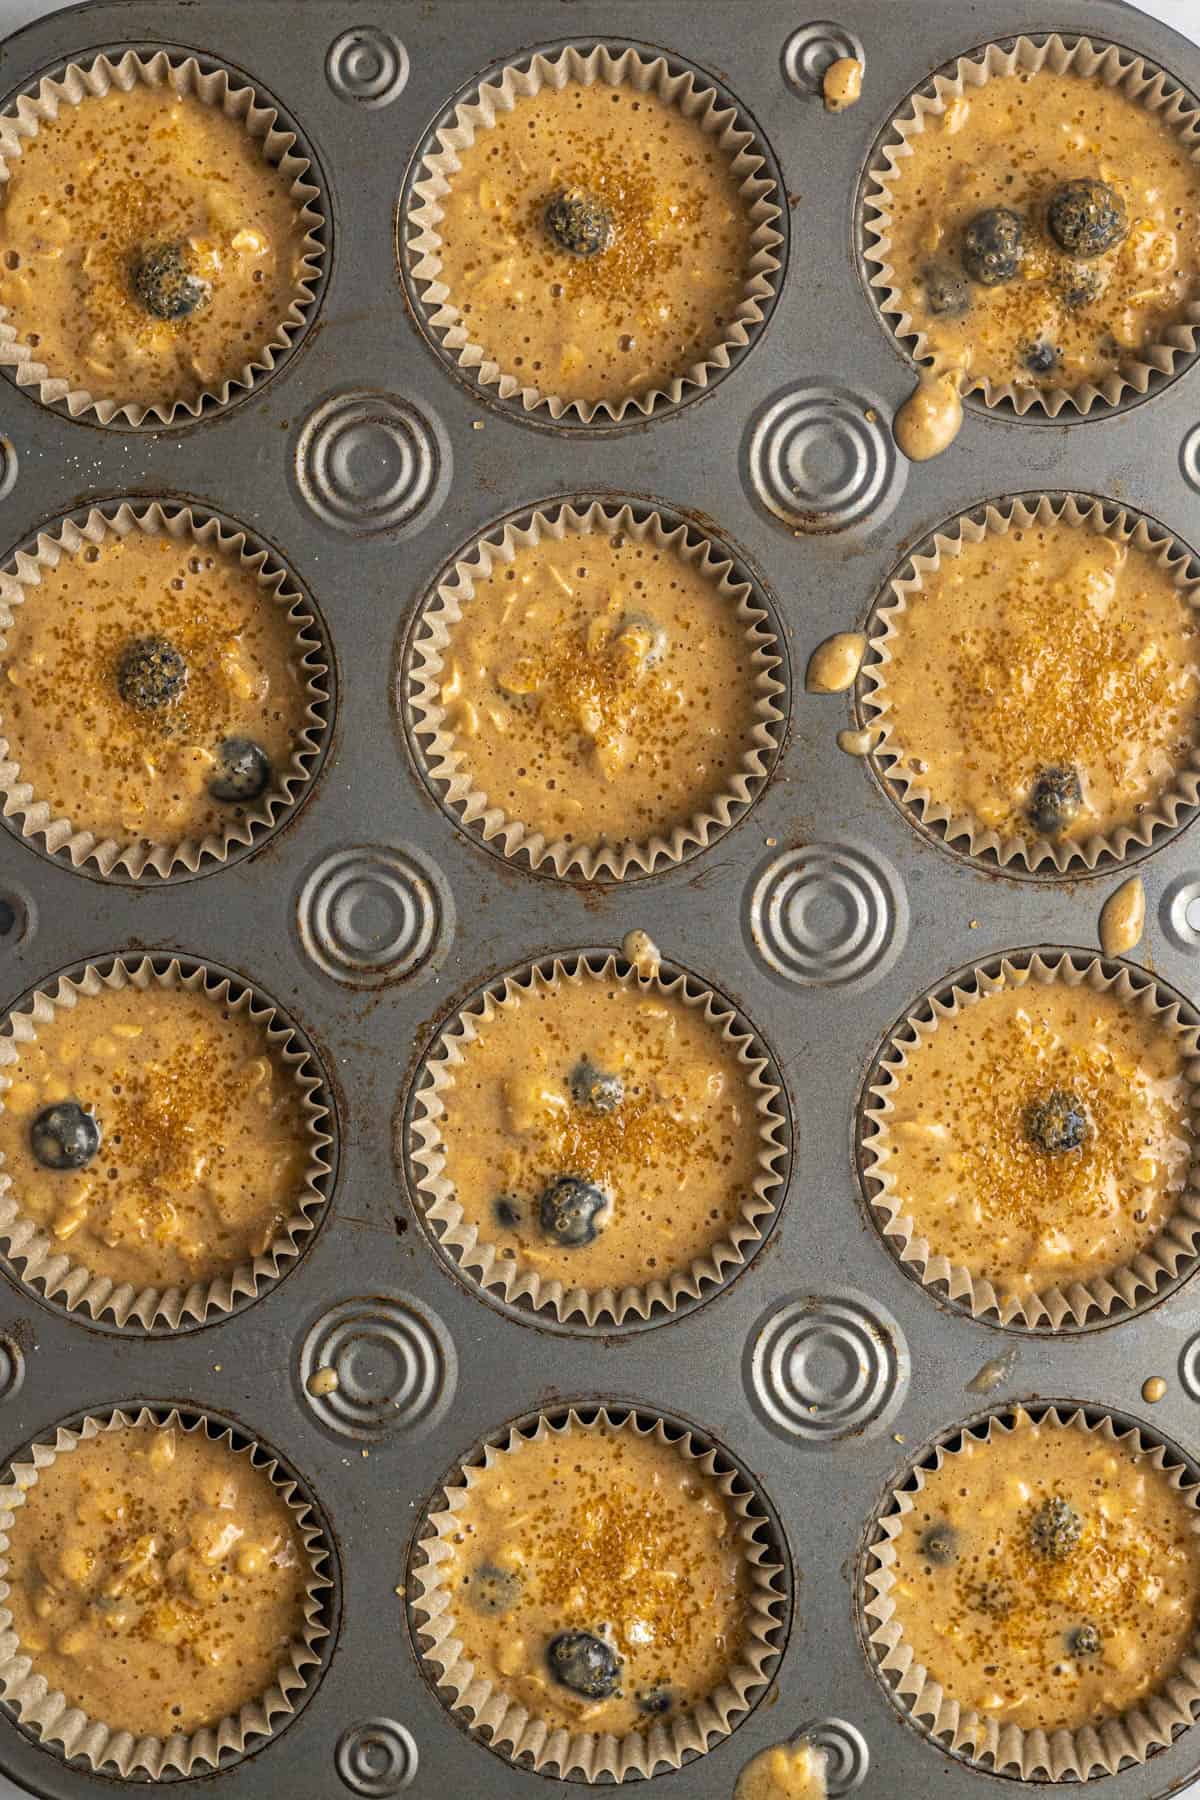 This image shows the muffin batter once it's been divided in the muffin pans. The Blueberry Banana Oat Muffins have been lightly sprinkled with coarse sugar.